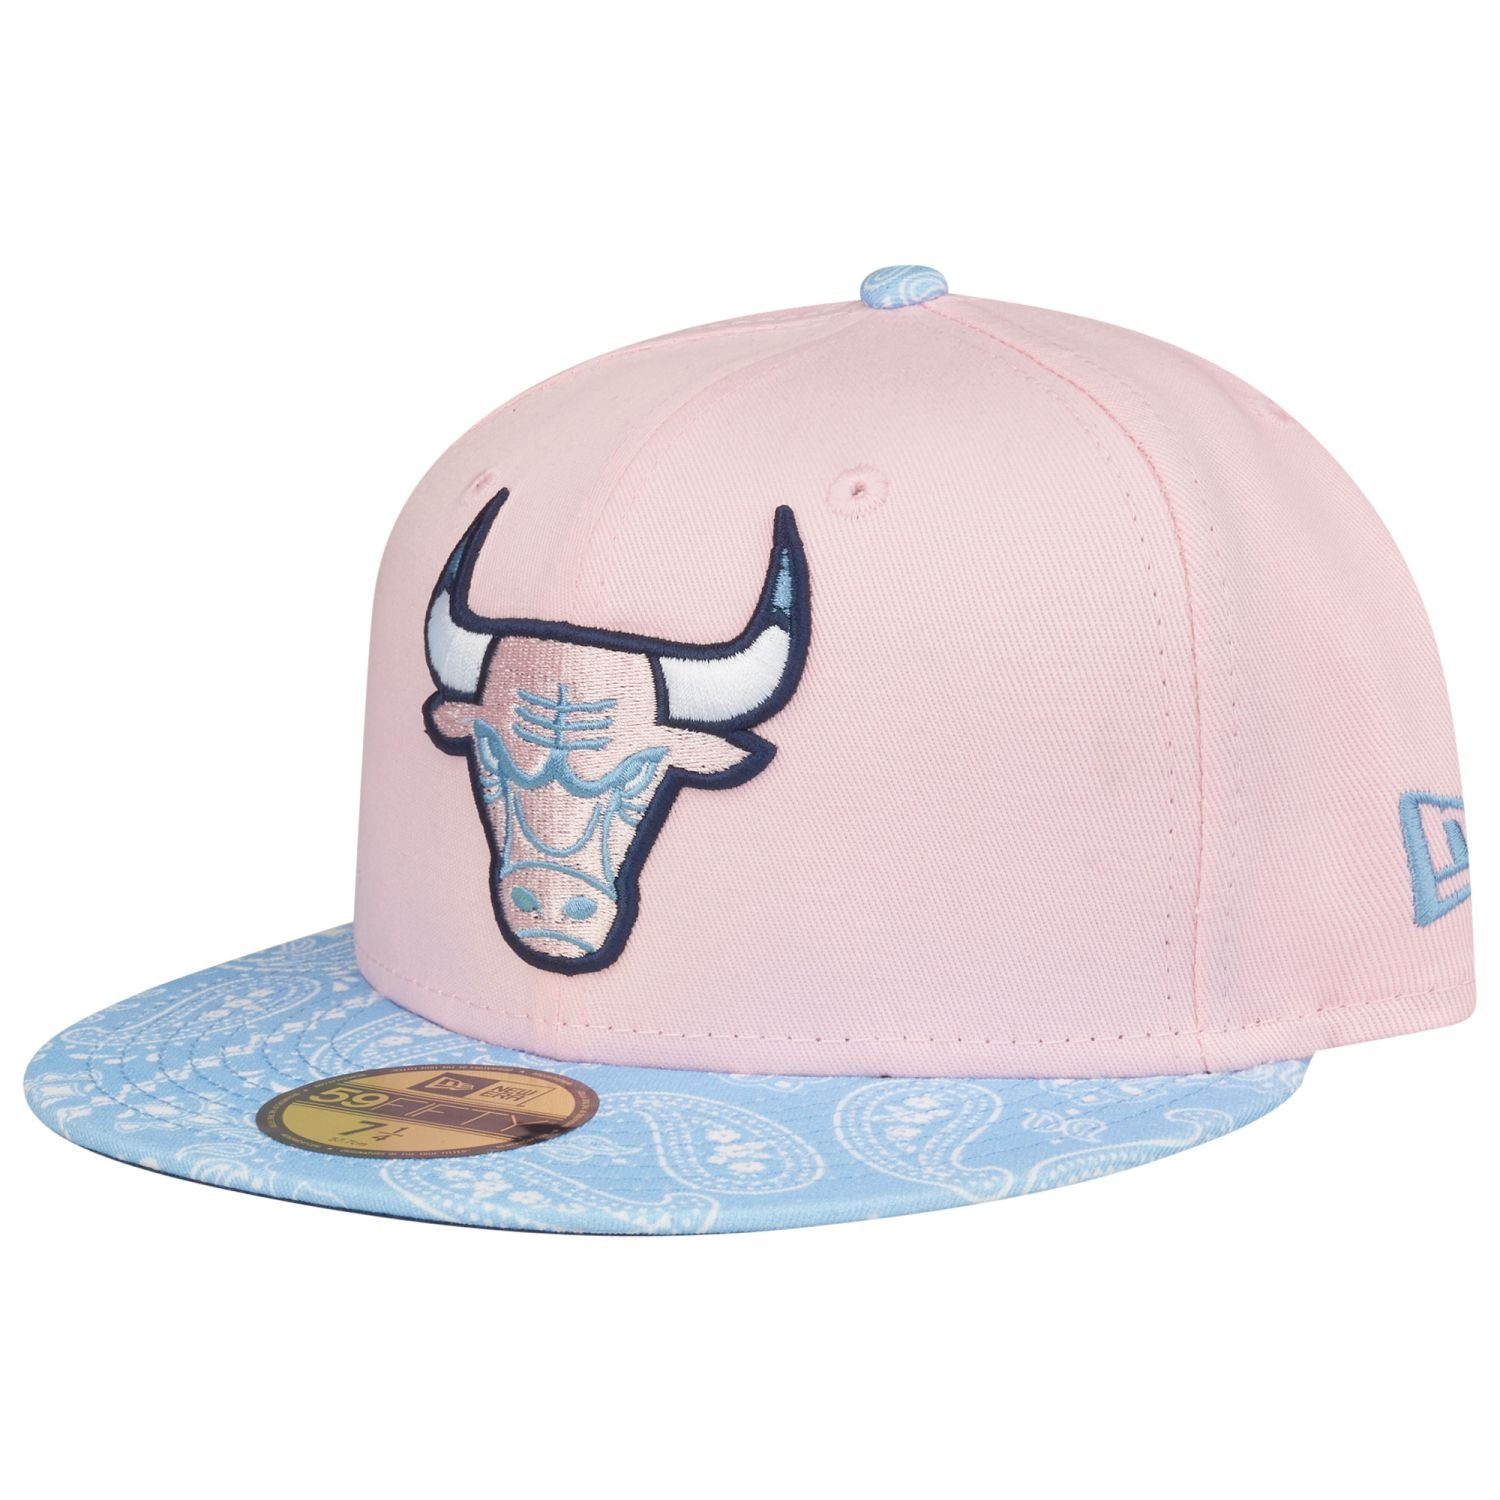 Bulls Fitted Era PAISLEY New Cap Chicago 59Fifty